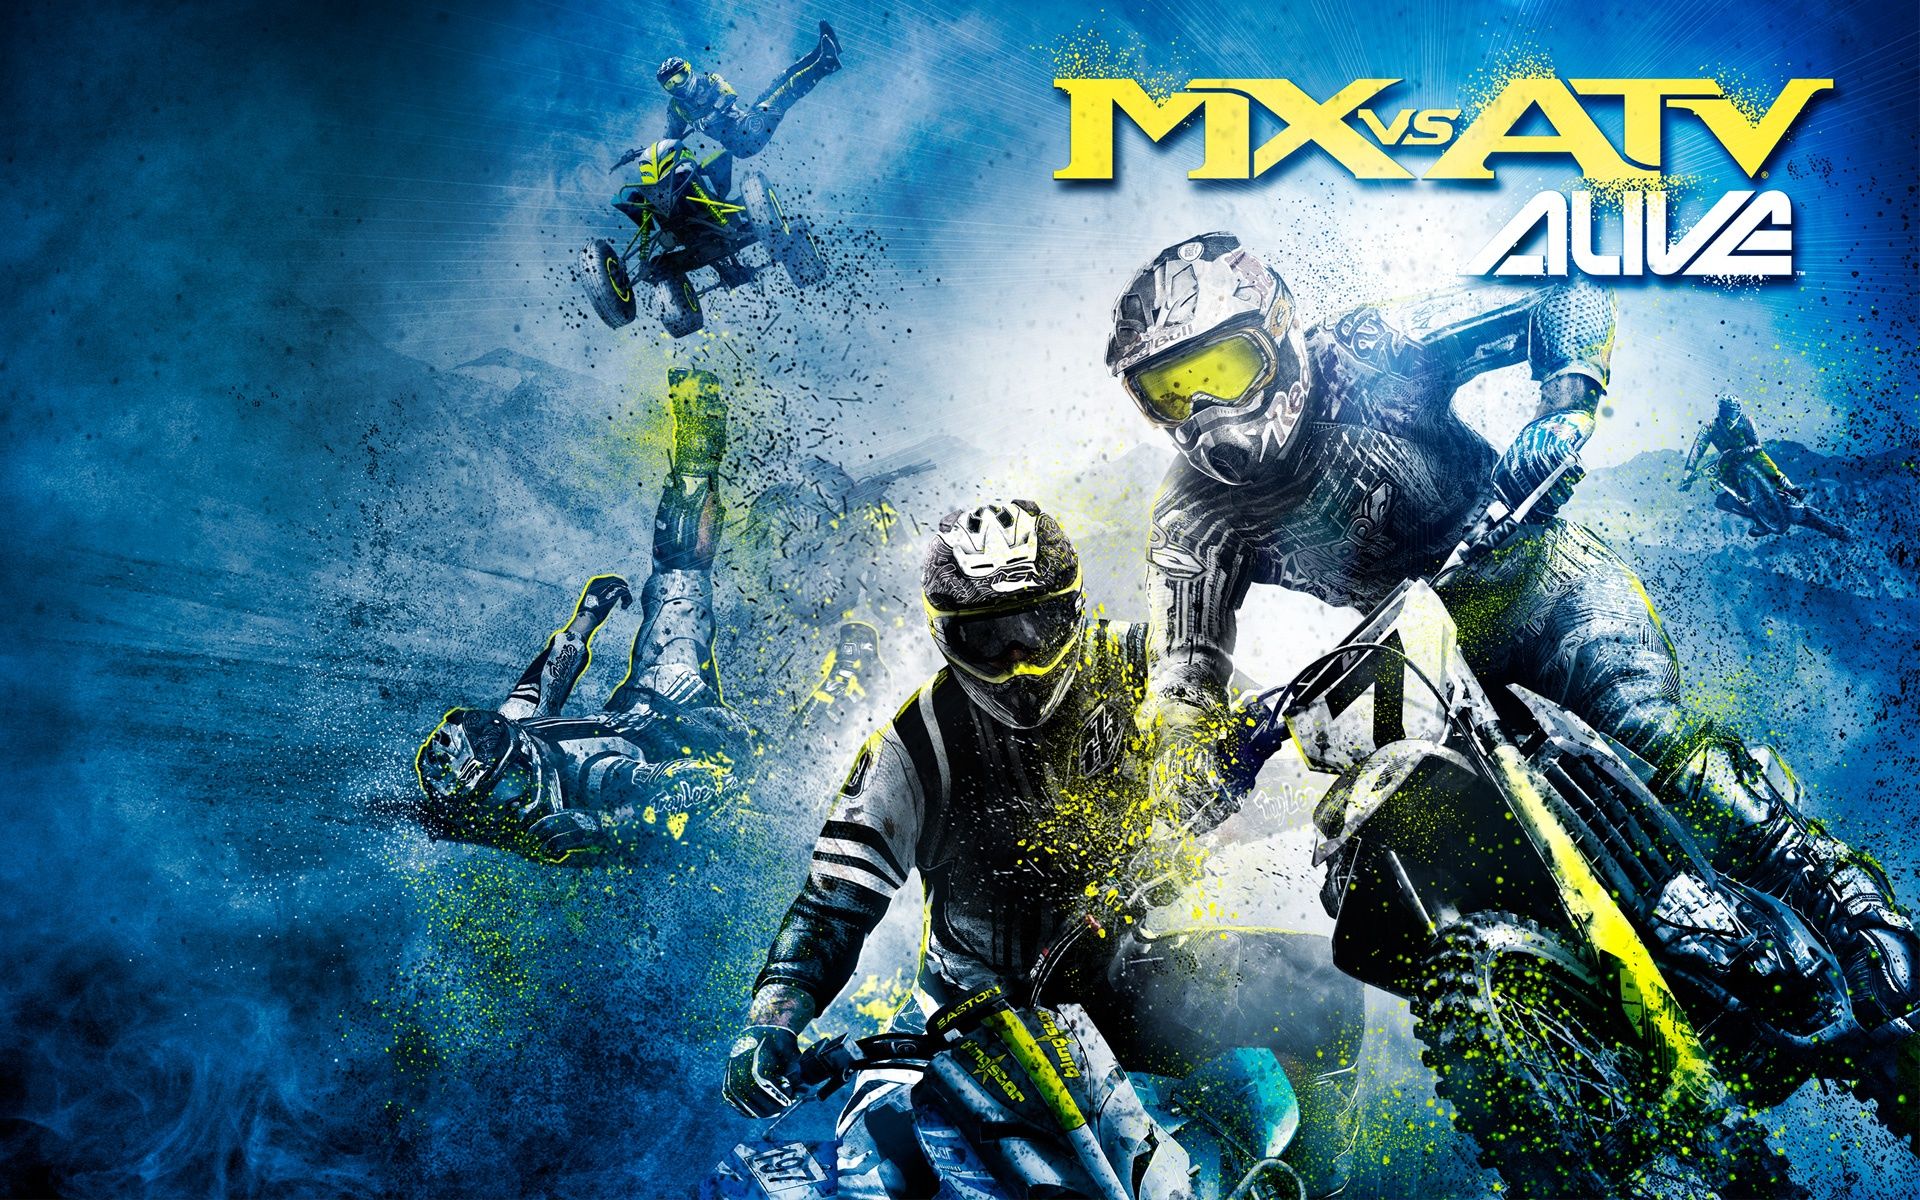 4 Mx Vs Atv Alive HD Wallpapers | Backgrounds - Wallpaper Abyss